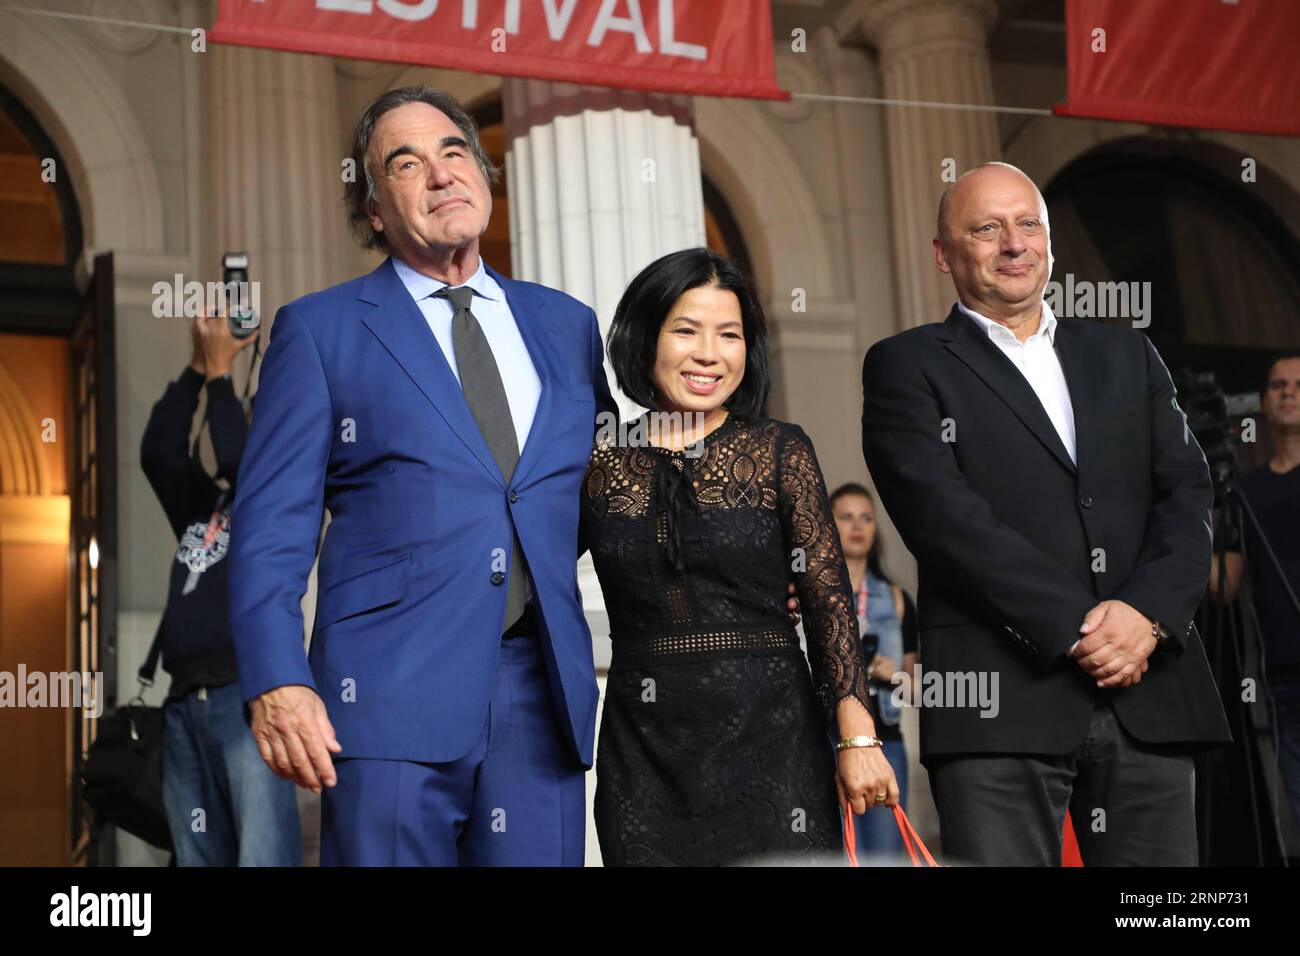 (170814) -- SARAJEVO, Aug. 14, 2017 -- Famous U.S. film director Oliver Stone (L) and the festival director Mirsad Purivatra (R) pose for a photo on the red carpet during the 23rd Sarajevo Film Festival(SFF) in Sarajevo, Bosnia and Herzegovina, on Aug. 13, 2017. Oliver Stone received Honorary Heart of Sarajevo on the festival for his remarkable contribution to the art of film. )(yk) BOSNIA AND HERZEGOVINA-SARAJEVO-SARAJEVO FILM FESTIVAL HarisxMemija PUBLICATIONxNOTxINxCHN   170814 Sarajevo Aug 14 2017 Famous U S Film Director Oliver Stone l and The Festival Director Mirsad Purivatra r Pose for Stock Photo